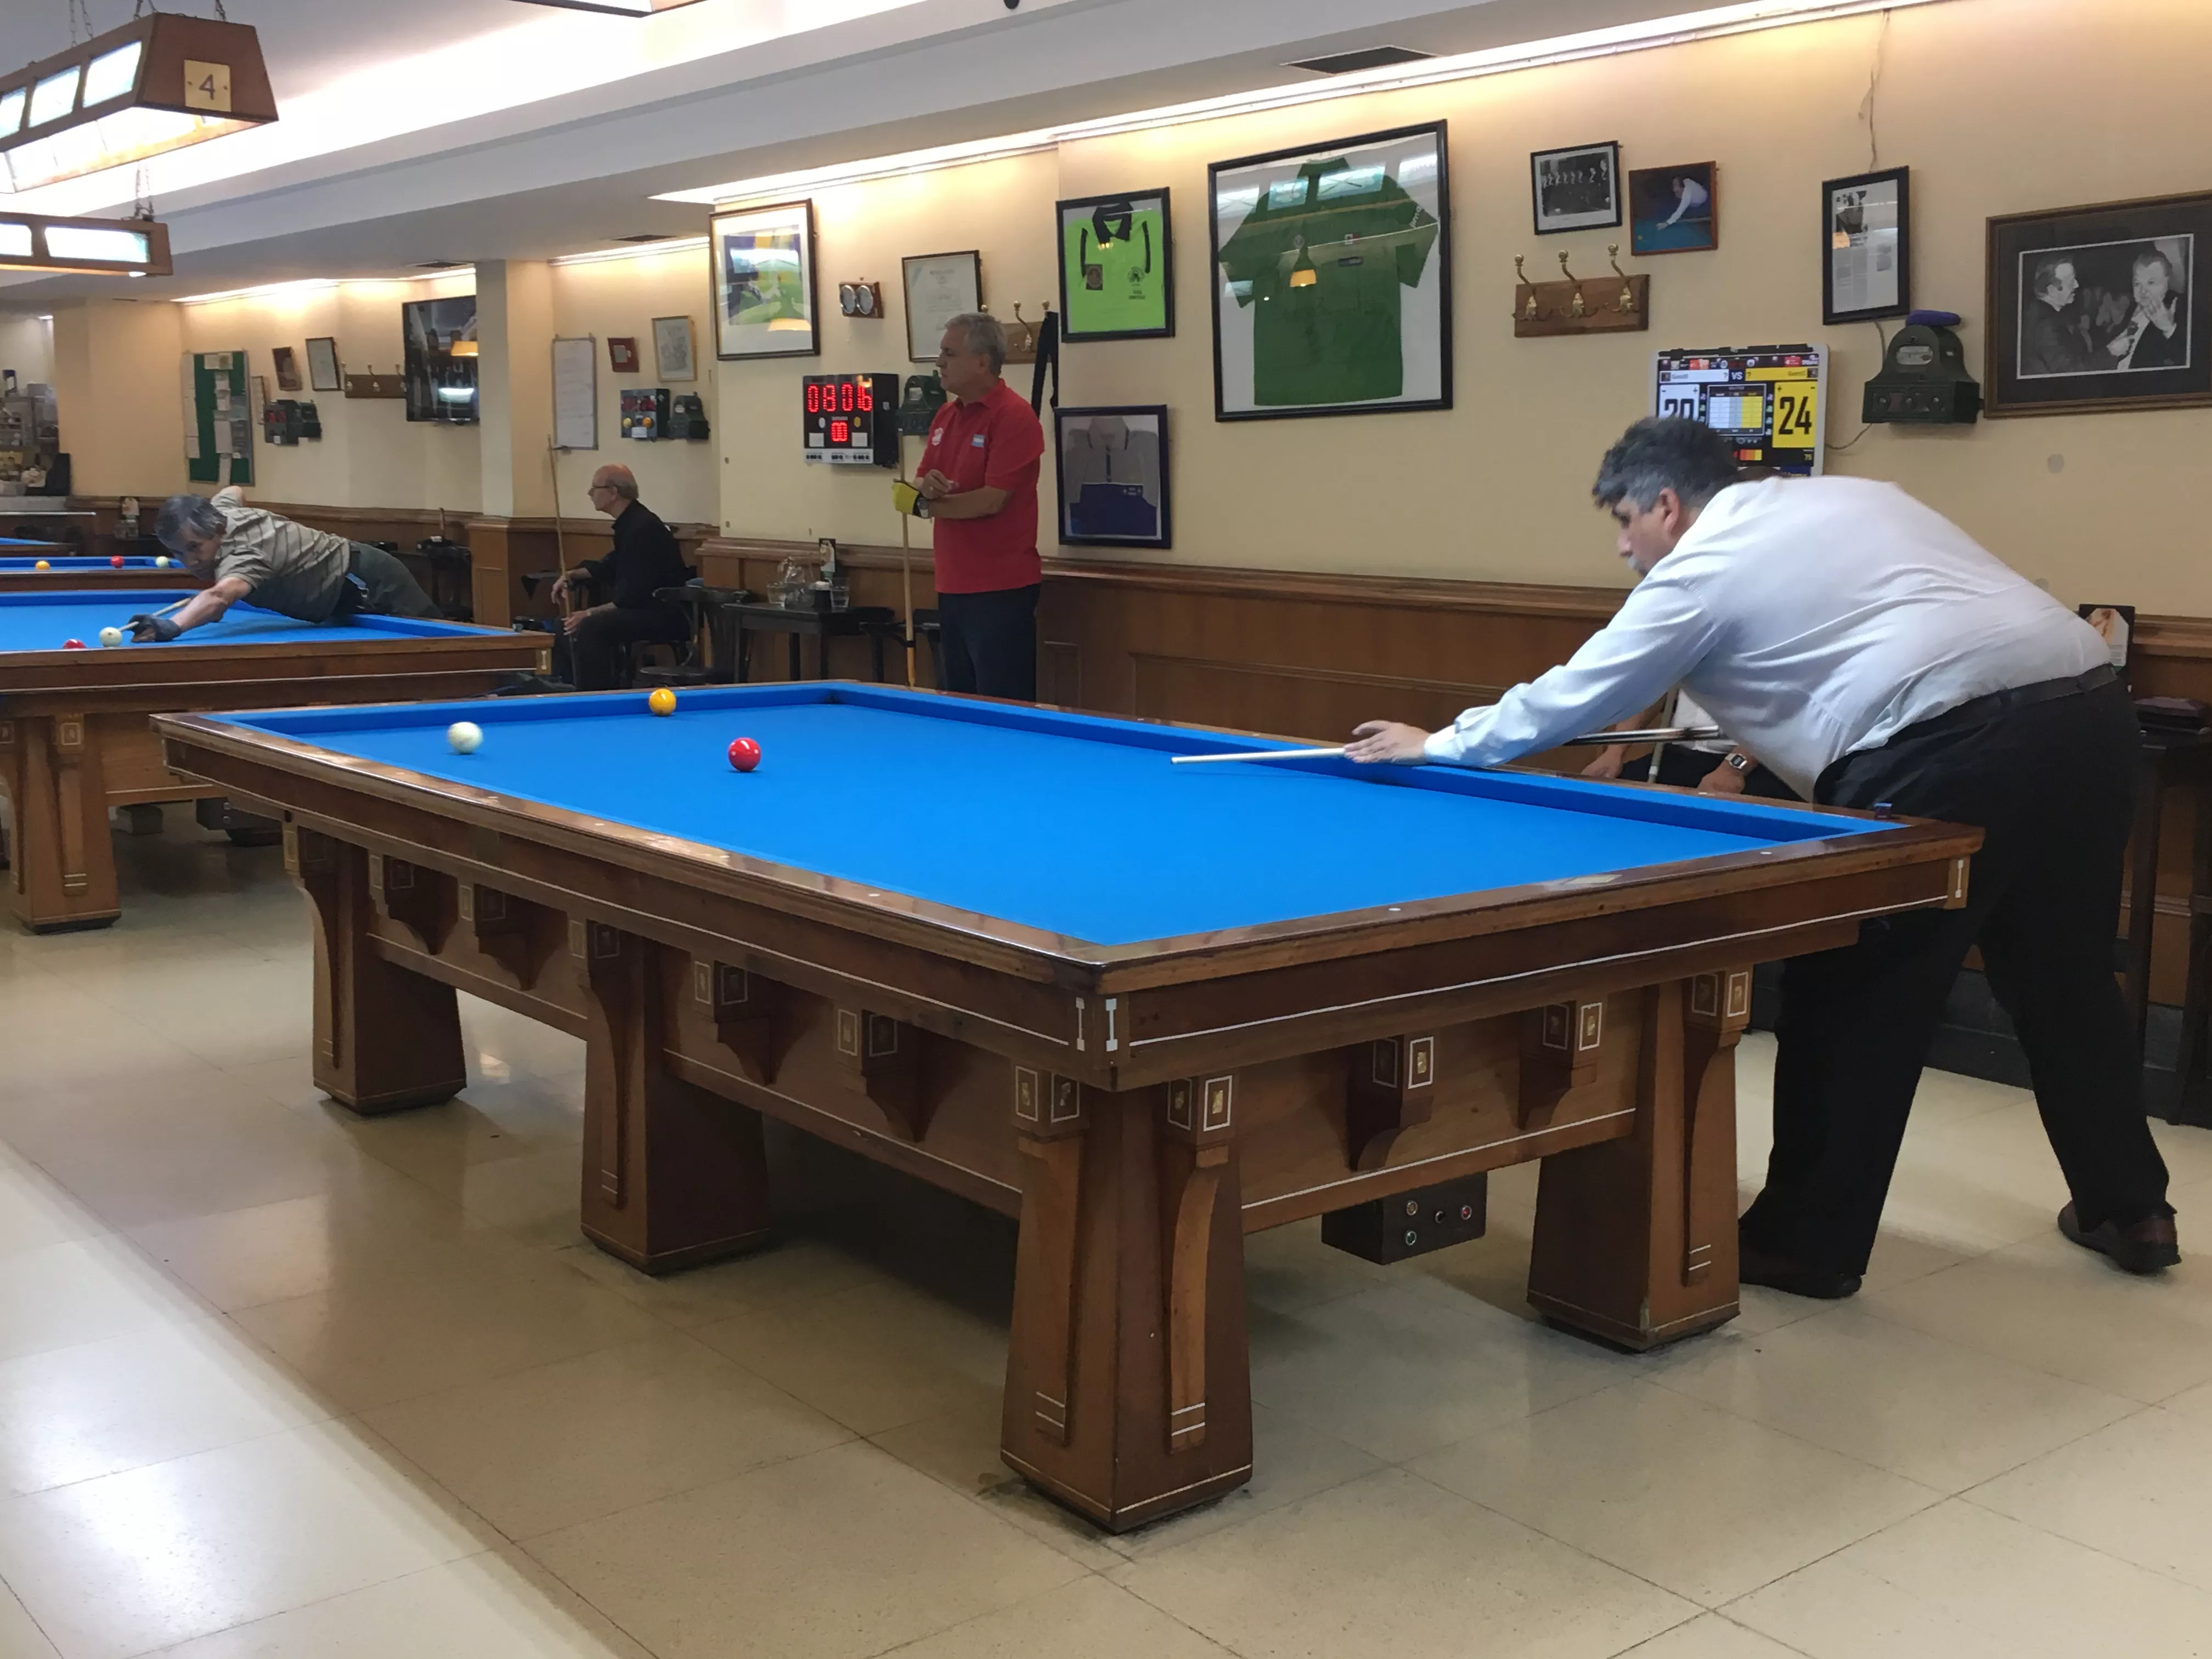 Los 36 Billares in Argentina, South America | Cafes,Billiards - Rated 5.5